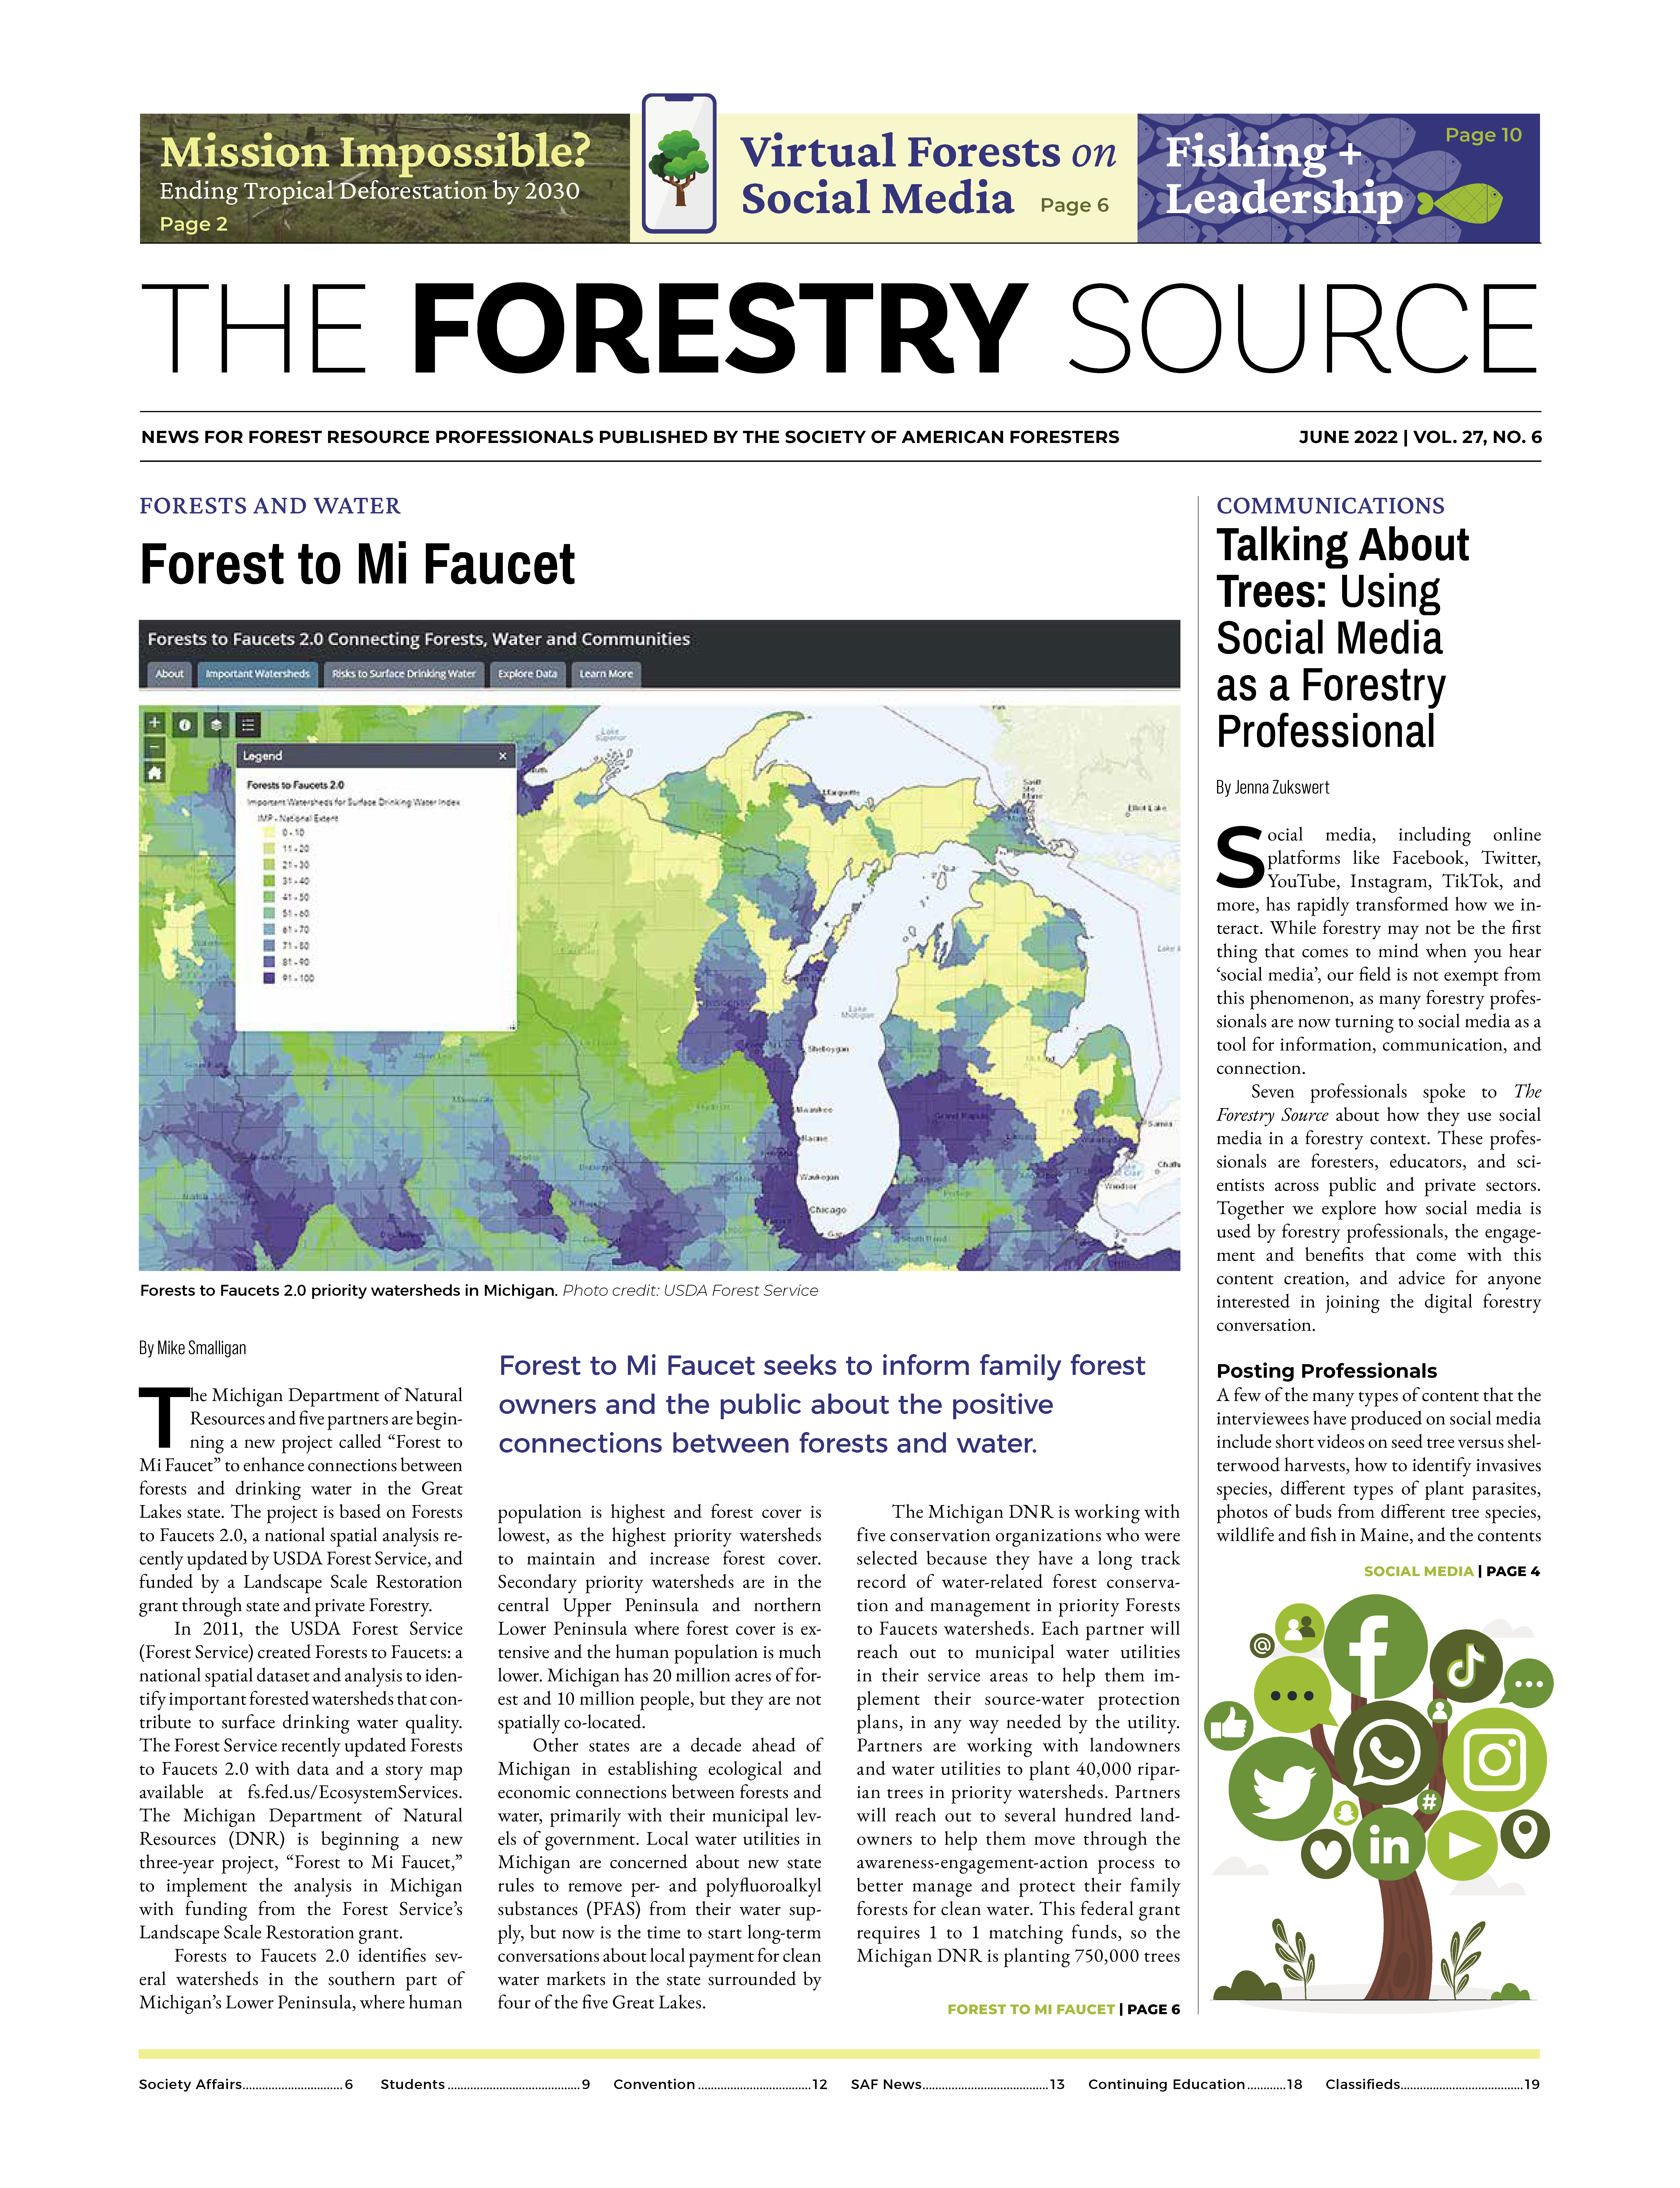 June 2022 Forestry Source